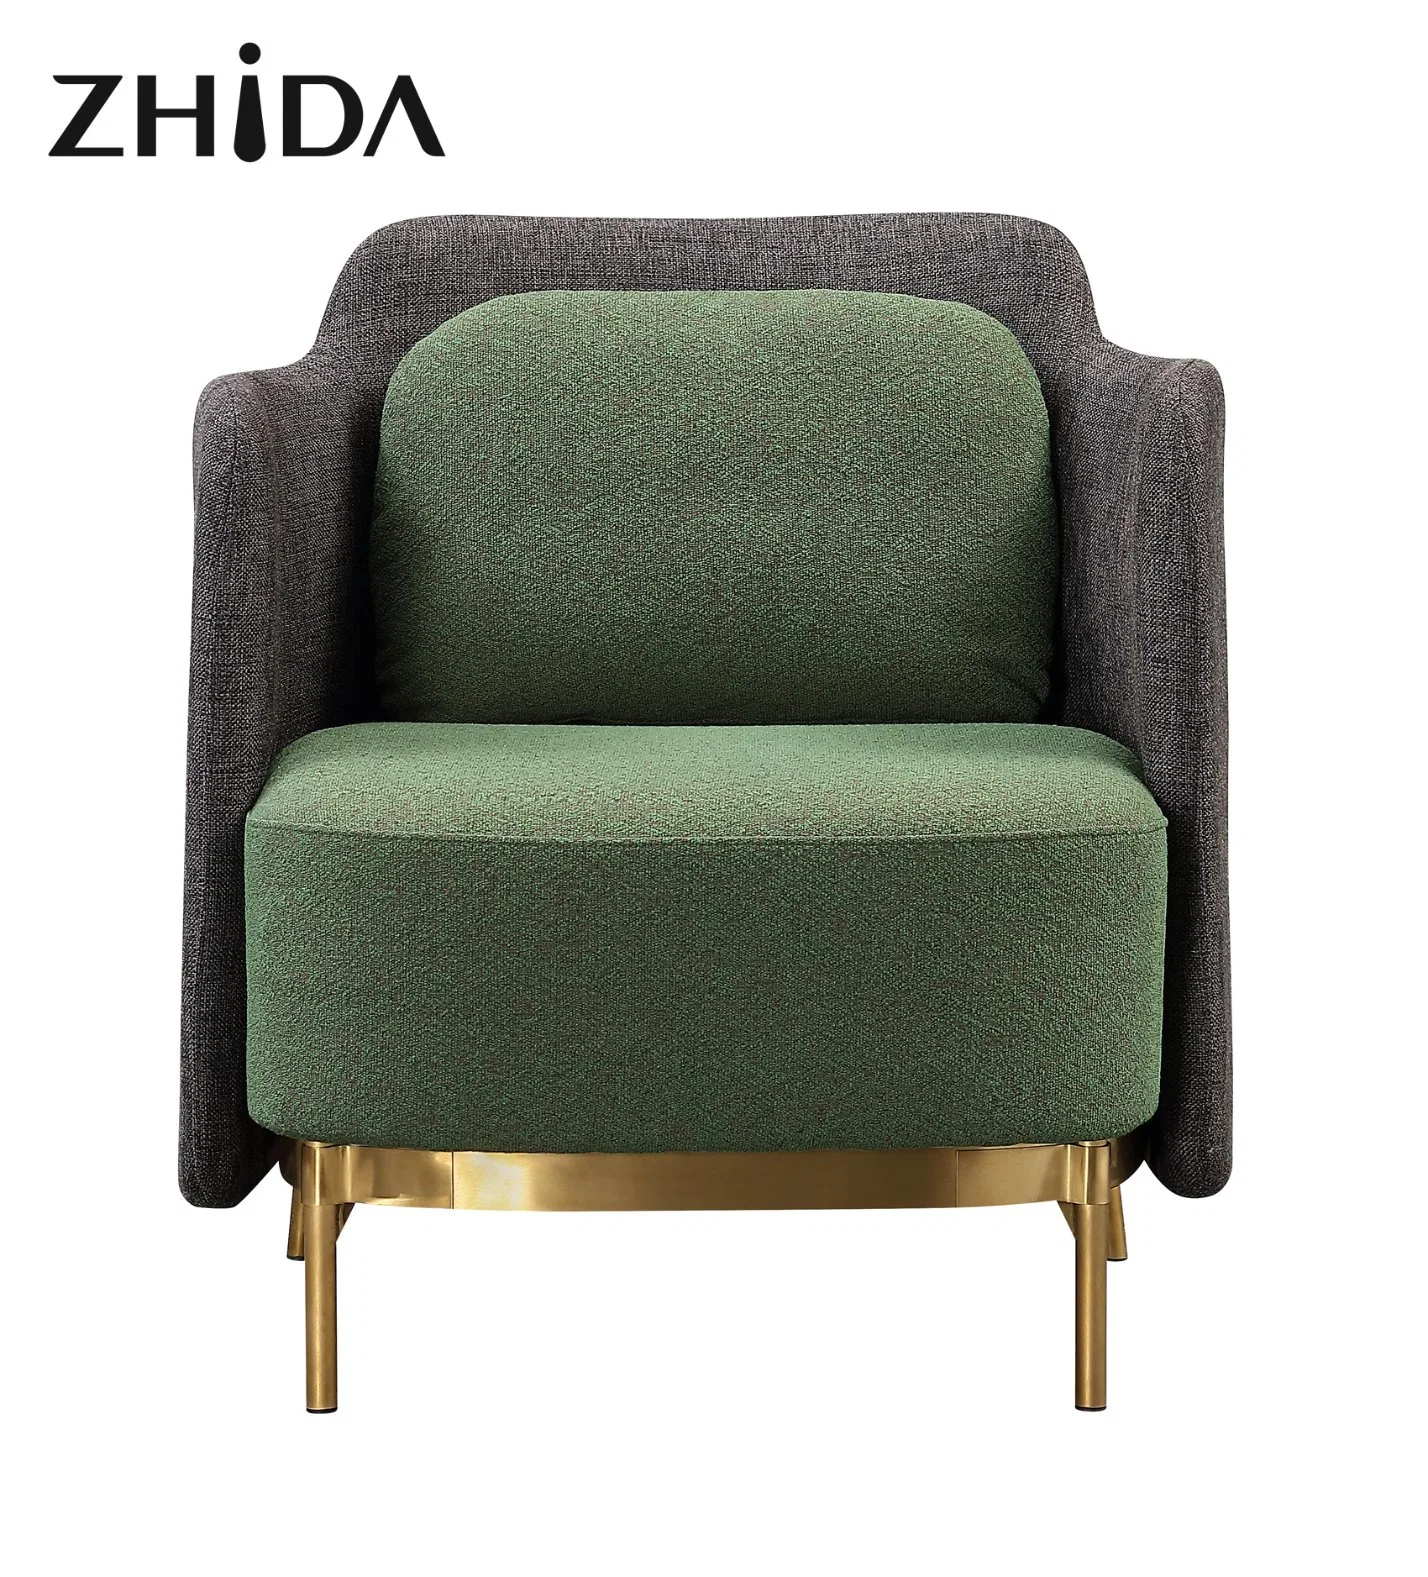 Luxury Relax Leather Leisure Accent Chair Living Room Furniture Metal Leg Leisure Modern Deisgn Fabric Armchair Bedroom Accent Chairs for Hotel Lobby Furniture